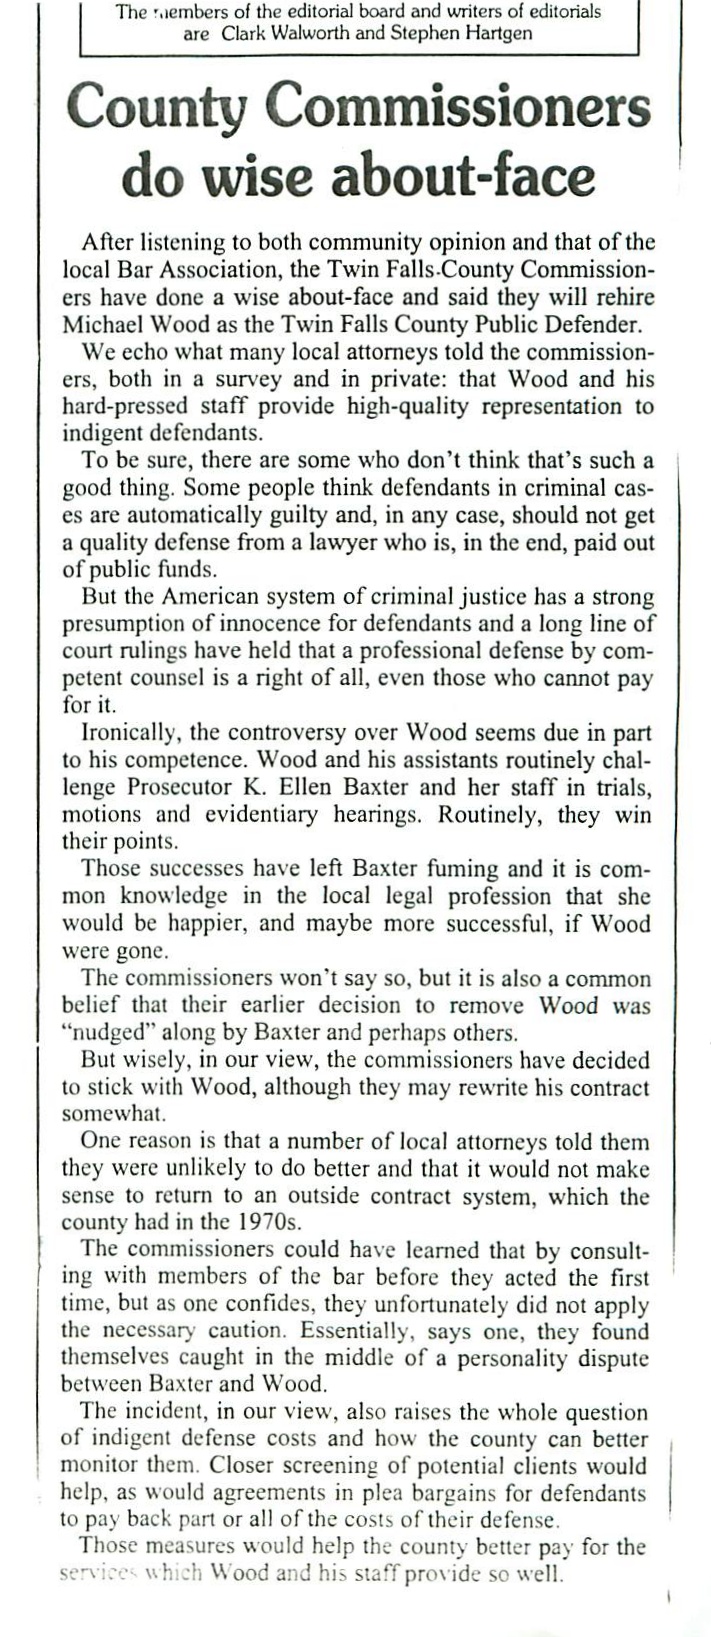 Fall '89 - Commissioners wise to retain Mike Wood